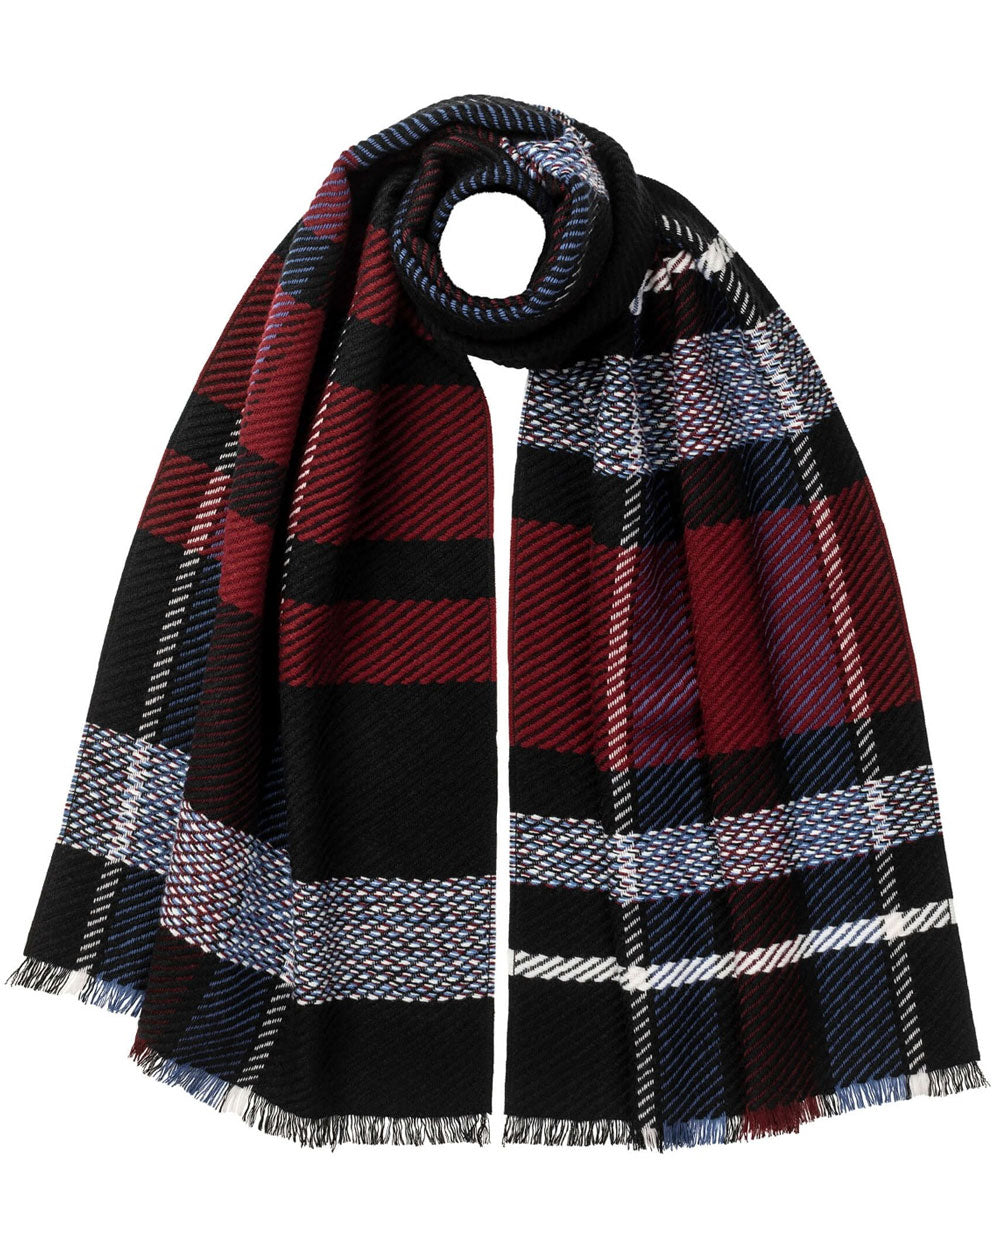 Cashmere Blend Textual Scarf in Burgundy and Black